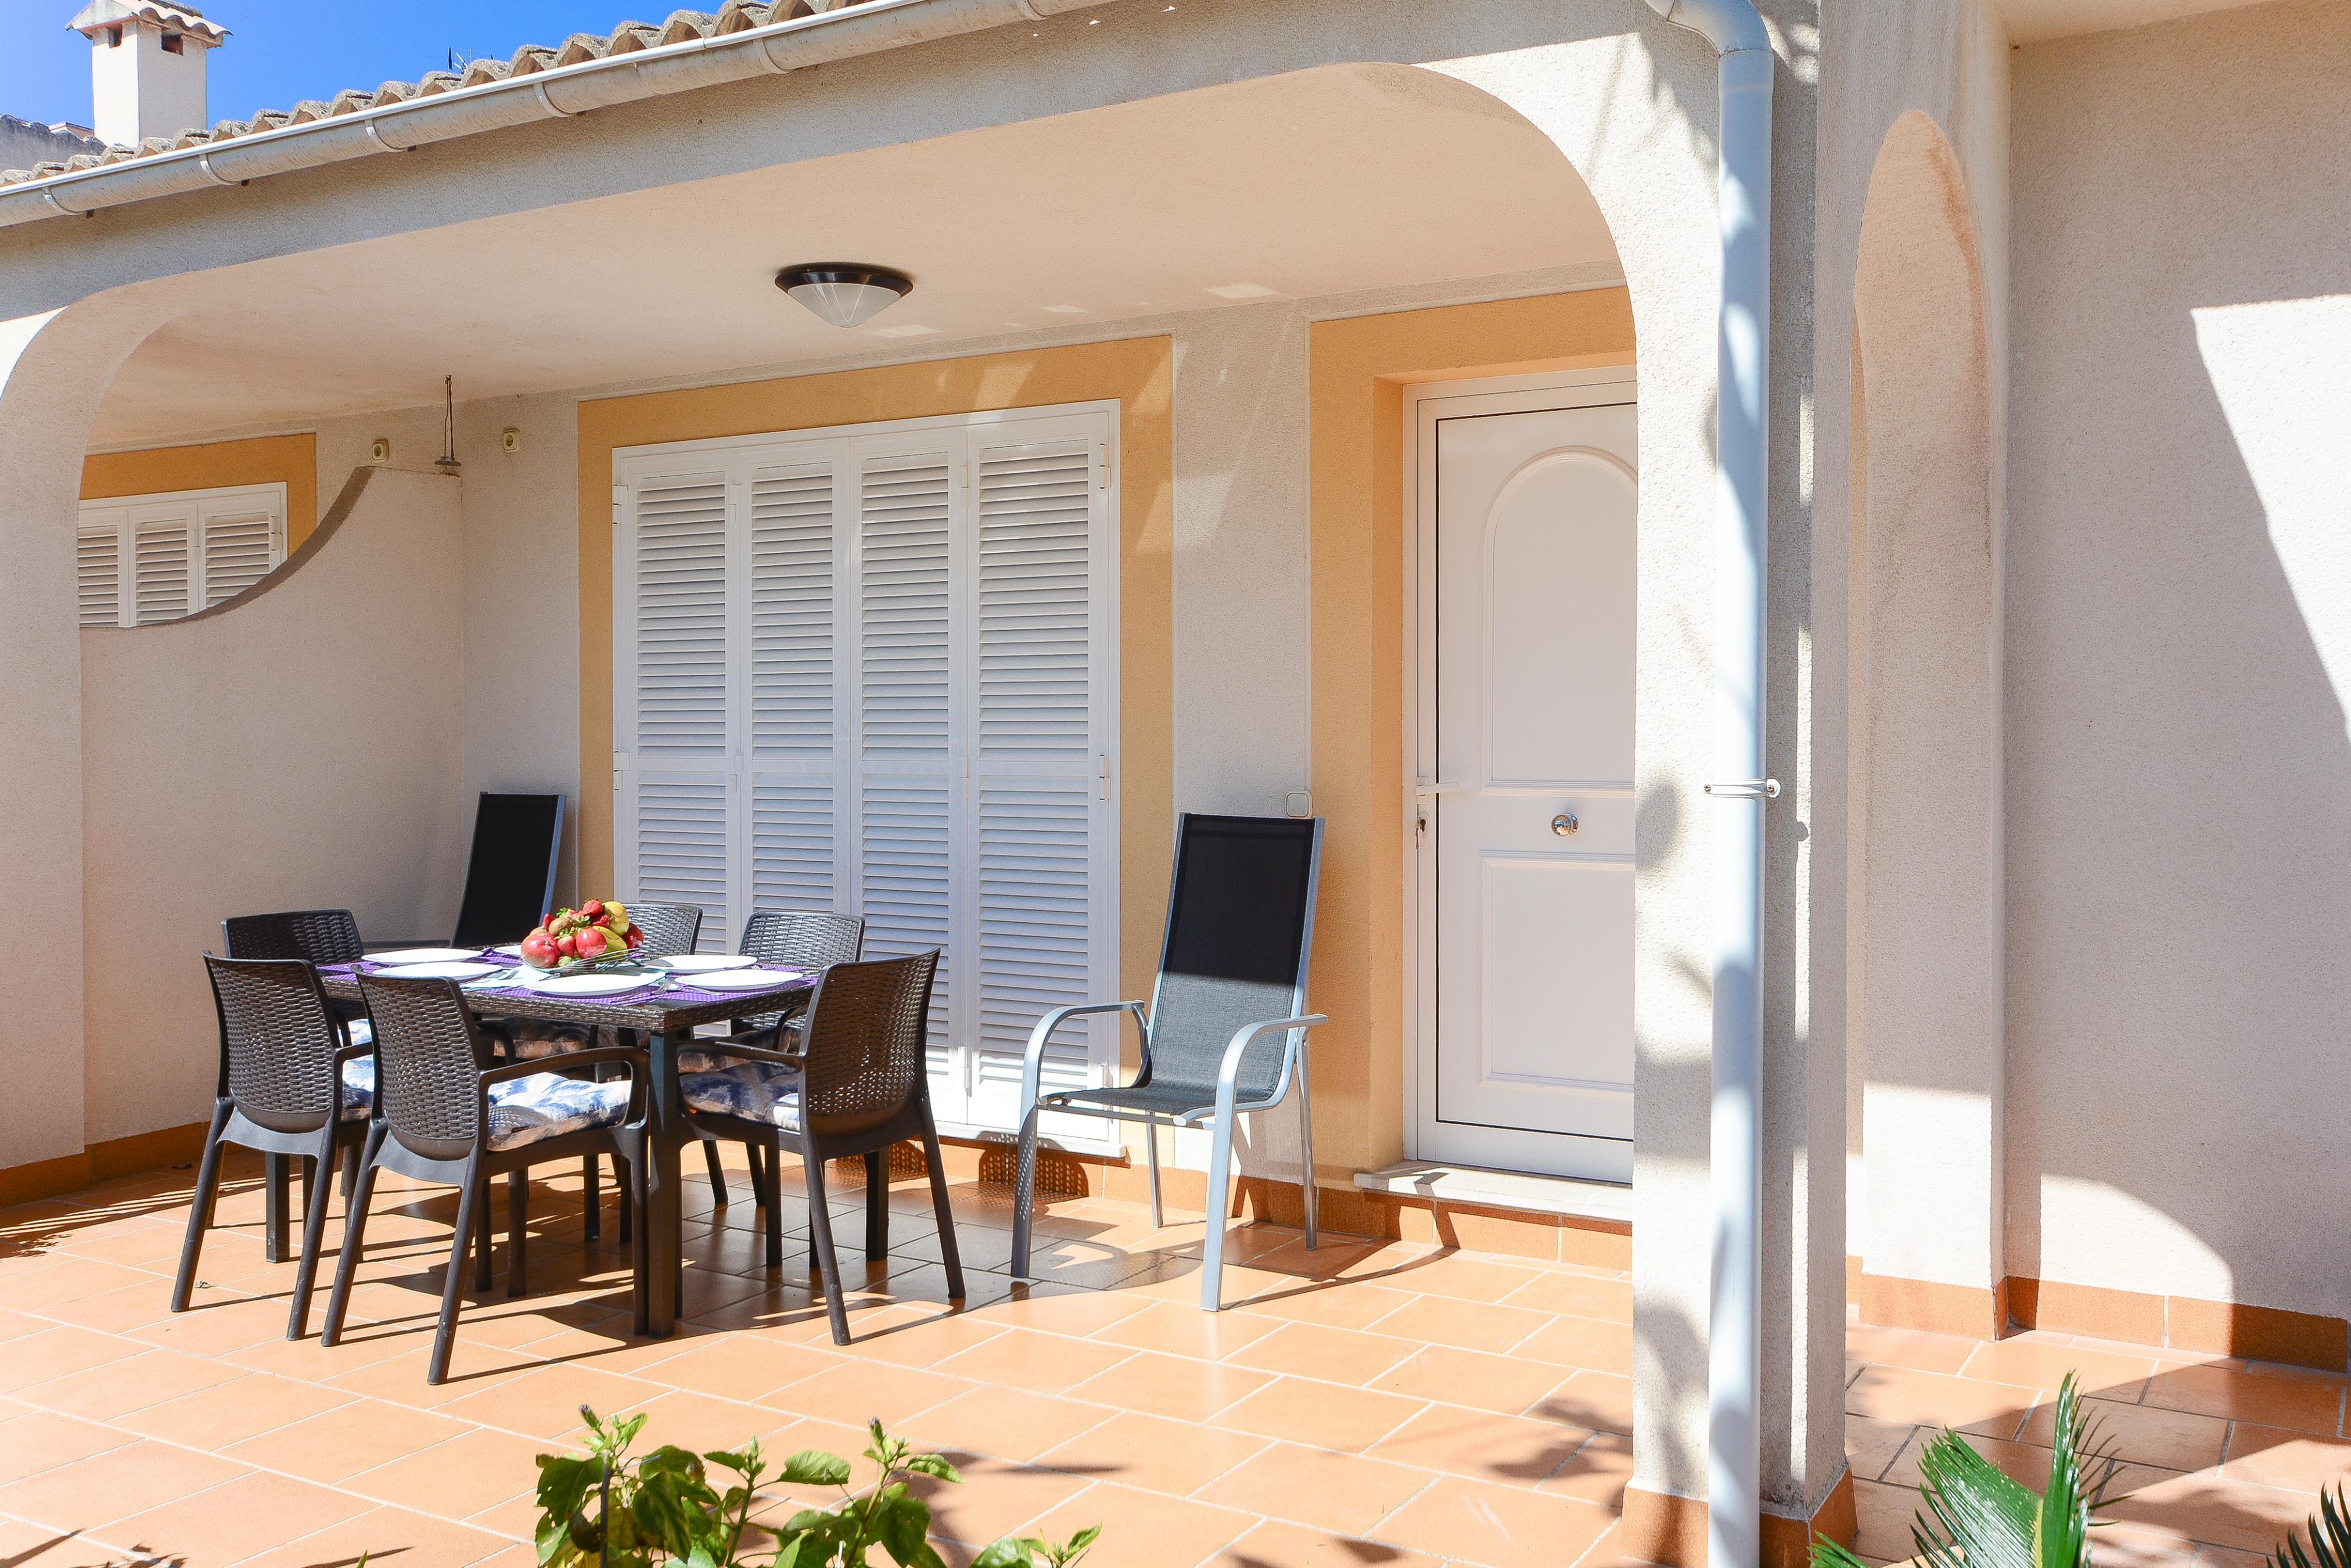 Property Image 2 - PINYA - Chalet with private garden in PORT D’ALCUDIA. Free WiFi